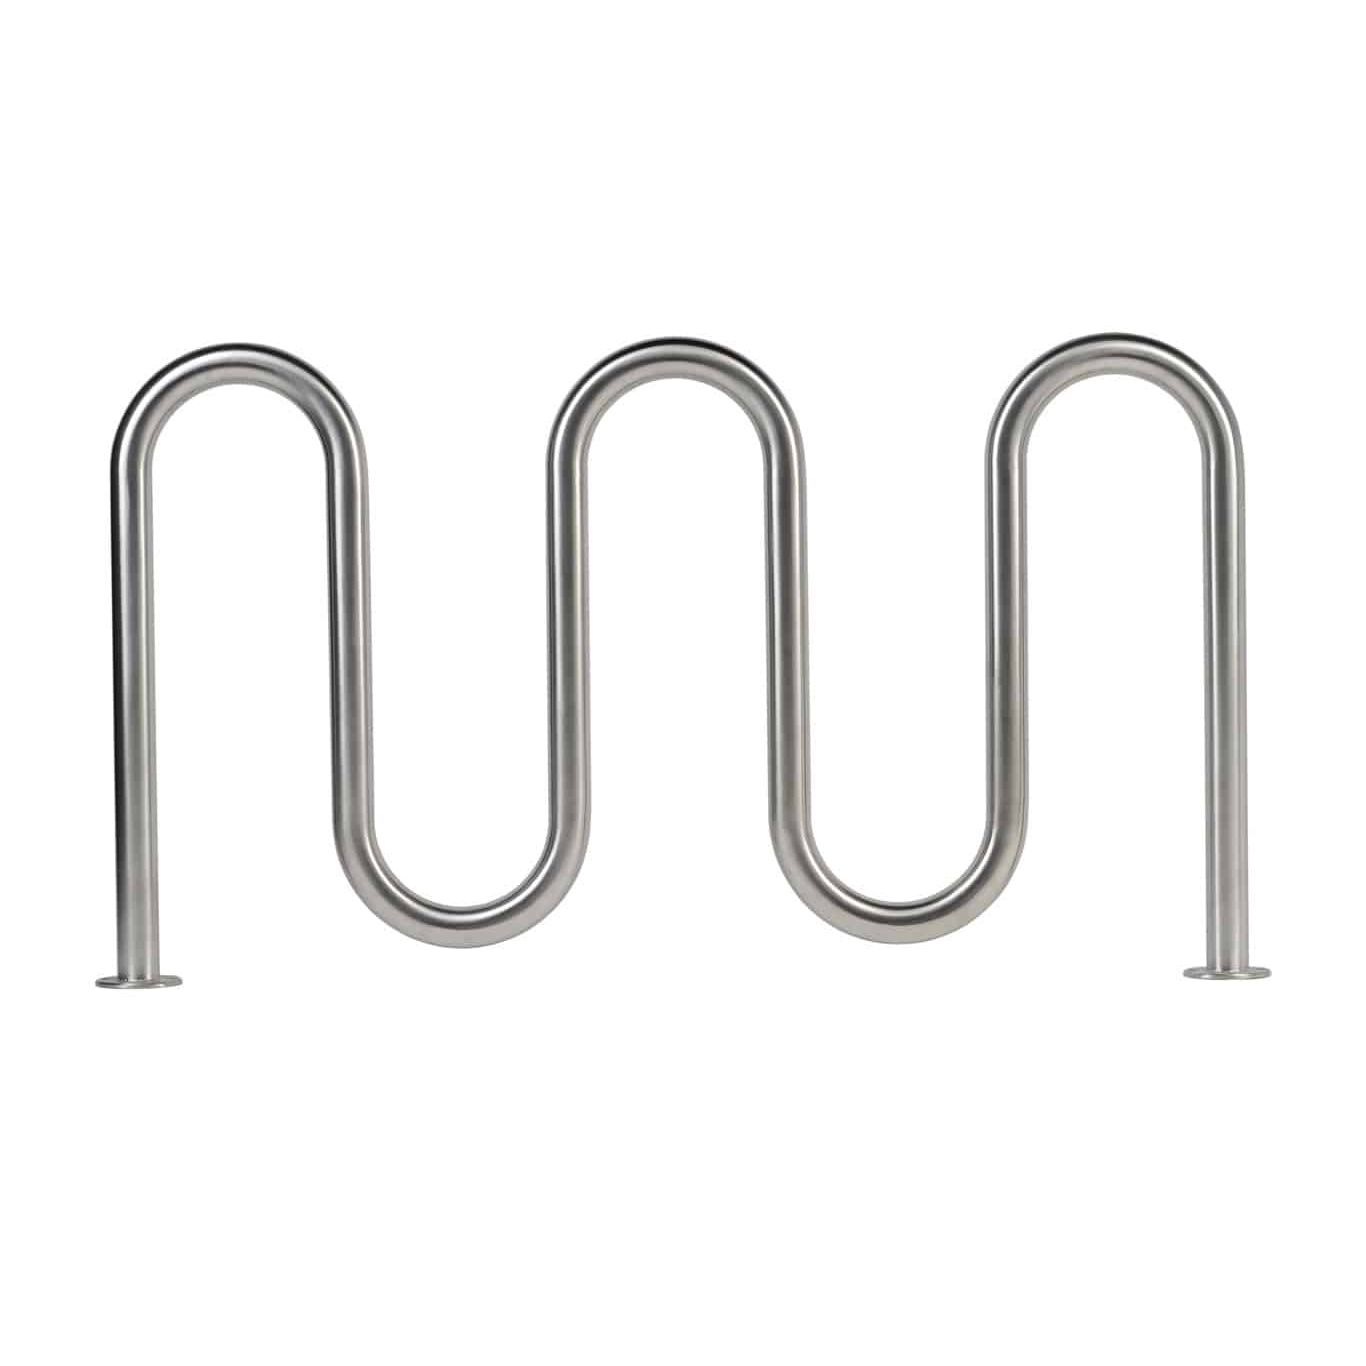 Stainless Steel Bicycle Parking Rack Featured Image